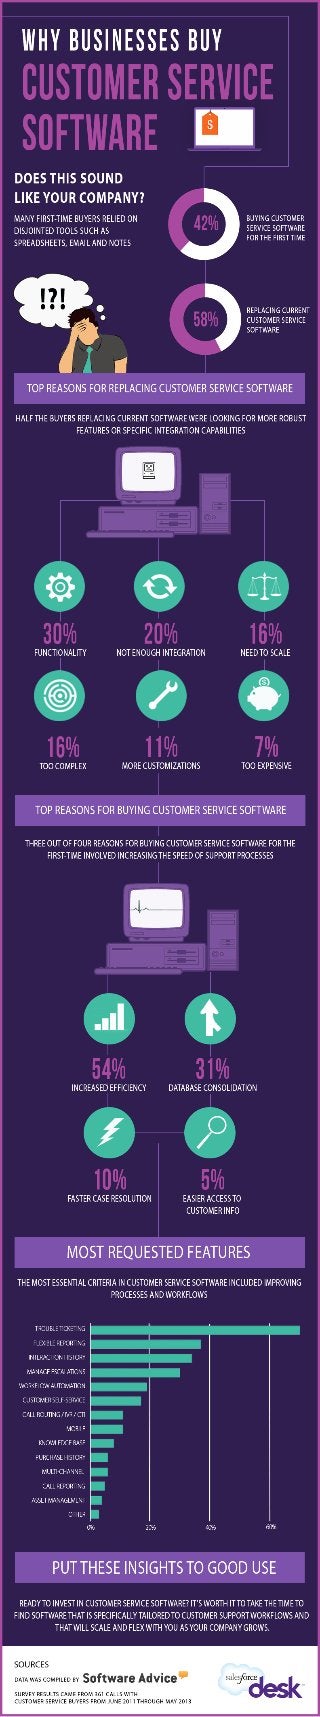 Why Businesses Buy Customer Service Software